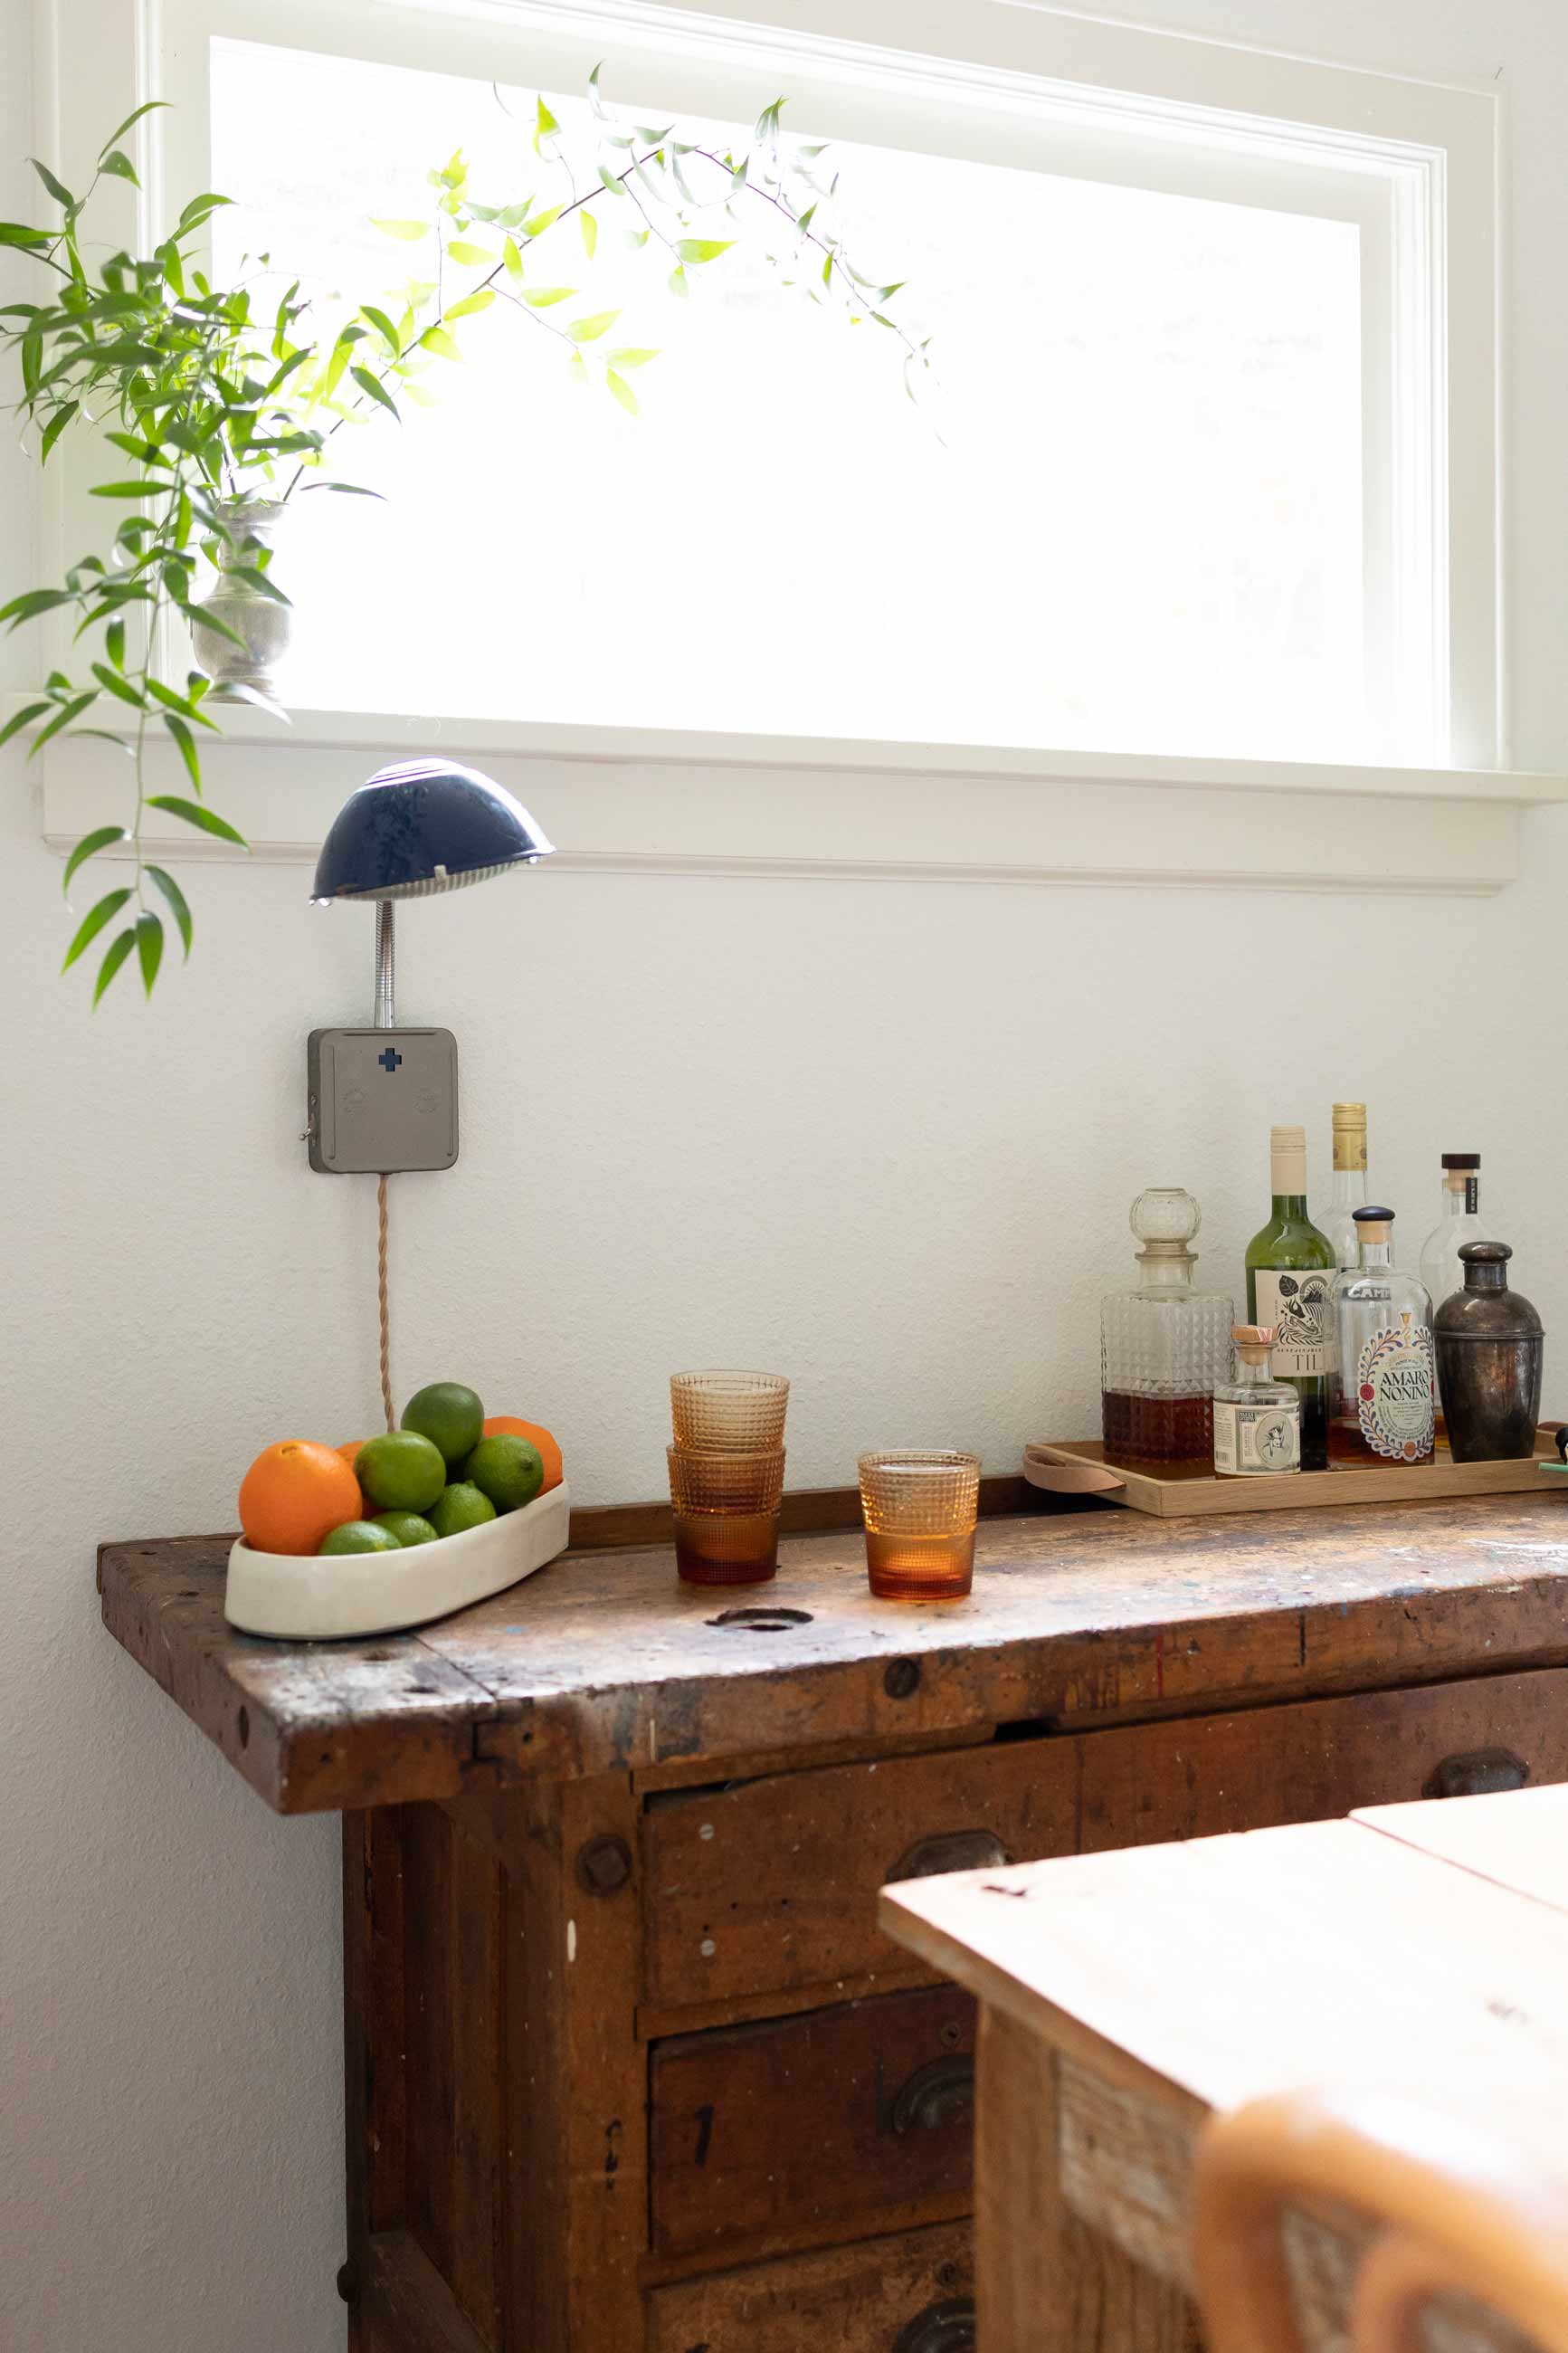 Vintage work bench converted into a modern bar cart with plug in wall sconce above.